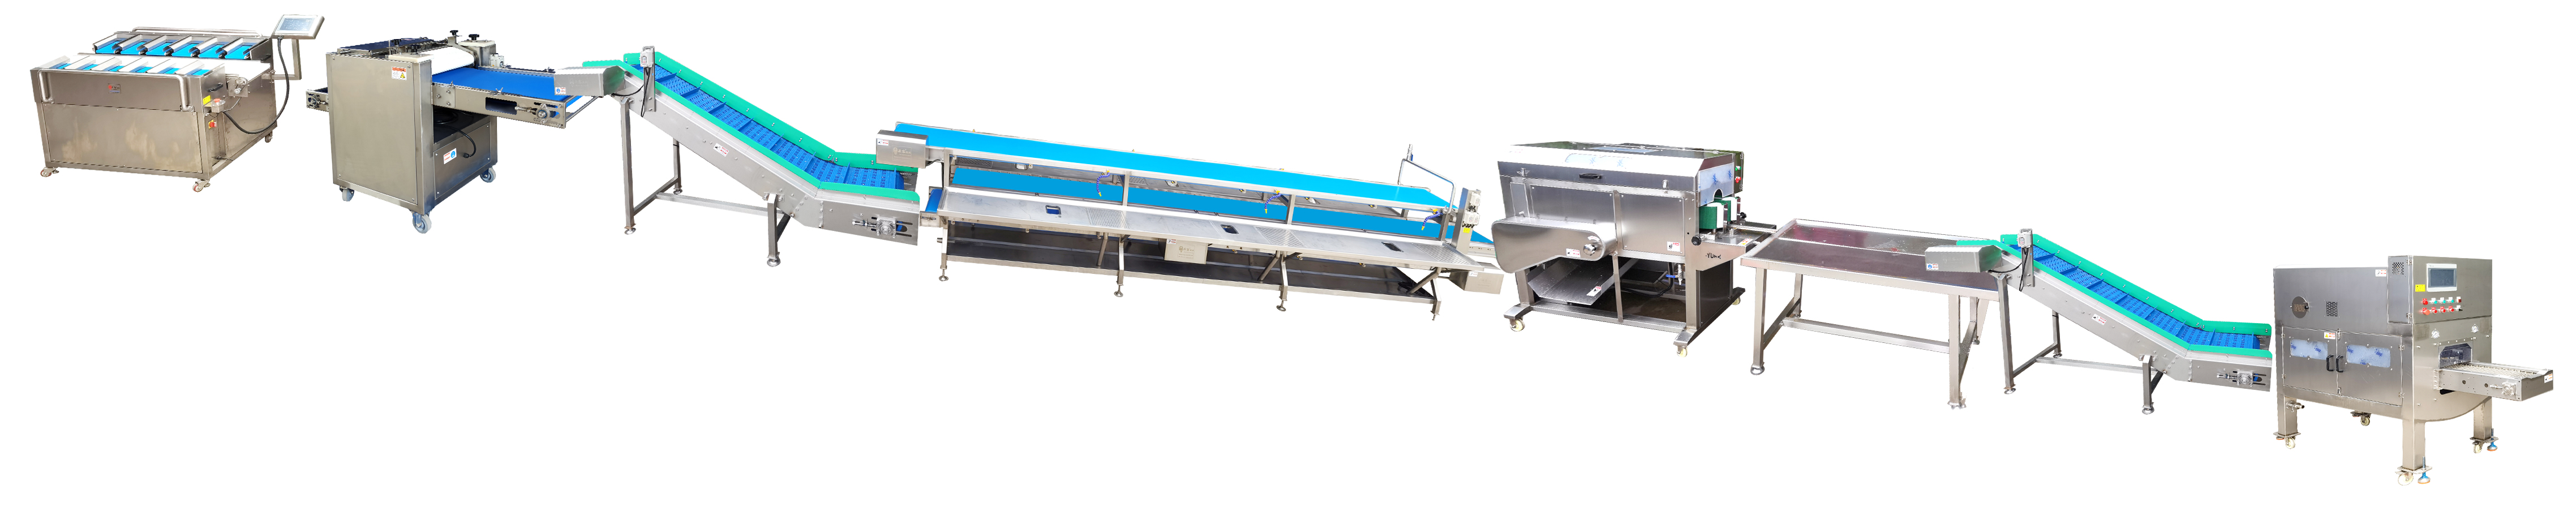 Complete set of equipment for fish processing production line